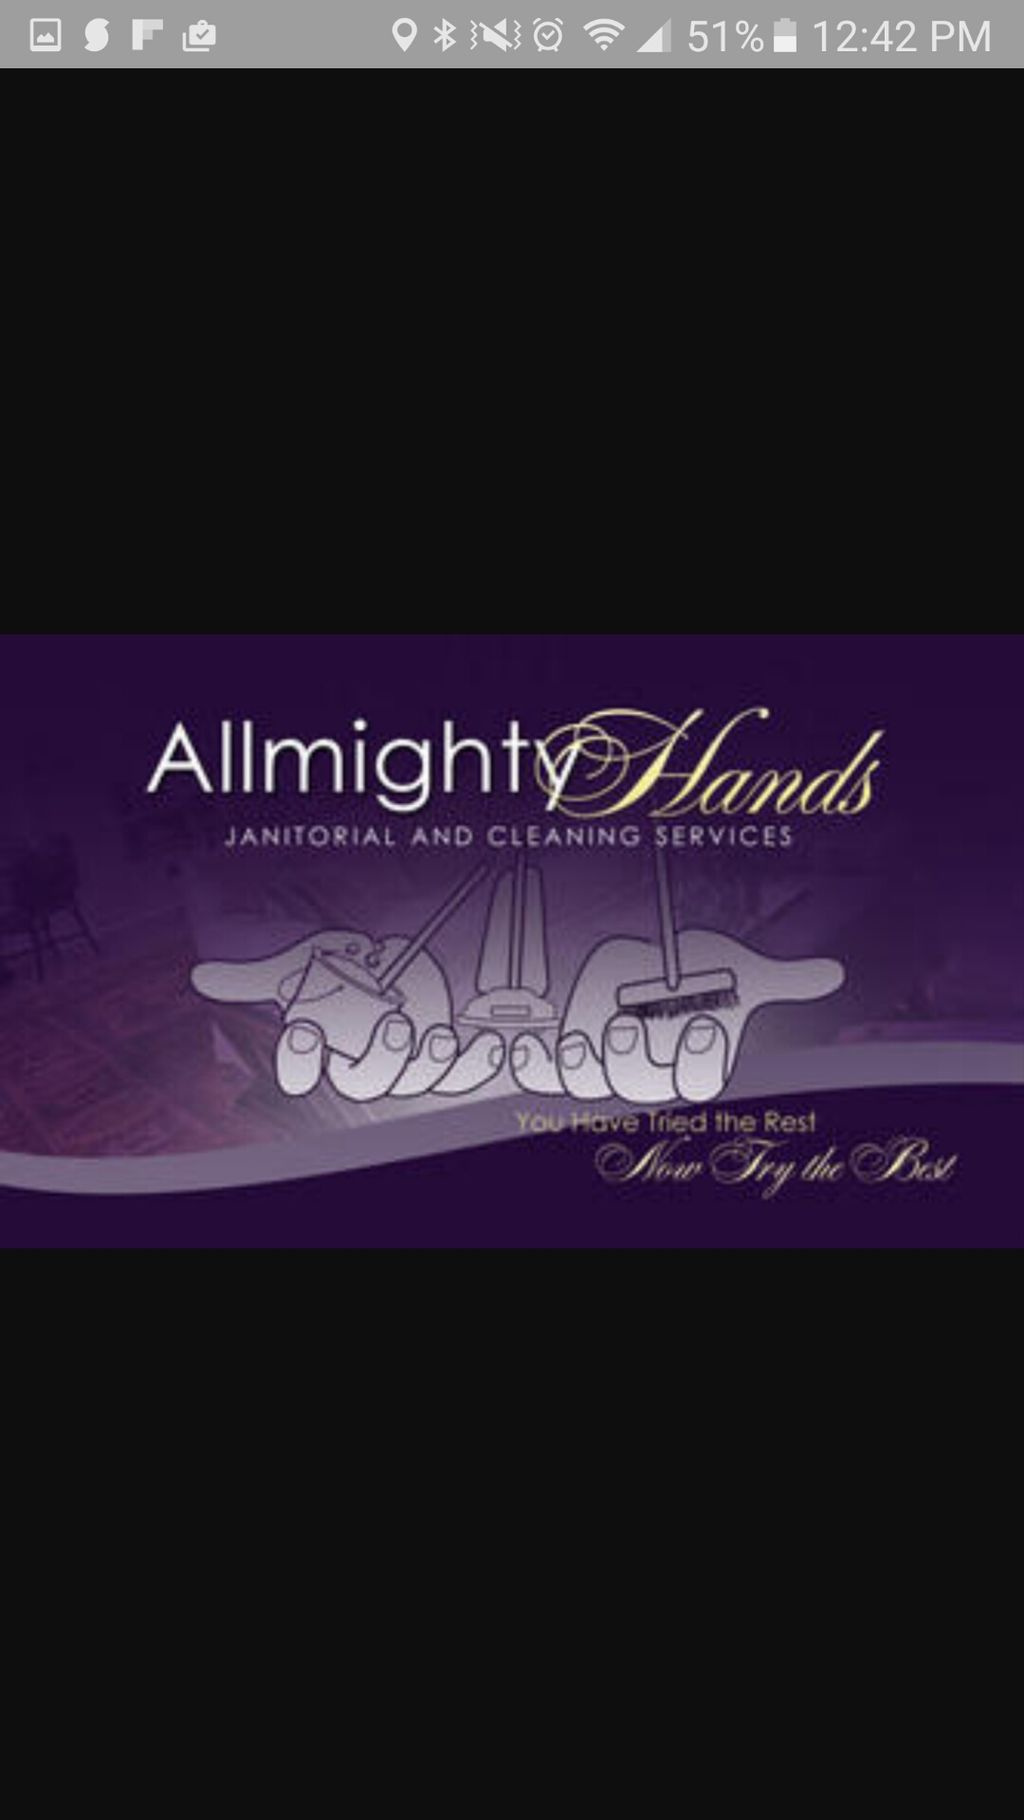 Allmighty Hands Janitorial & Cleaning